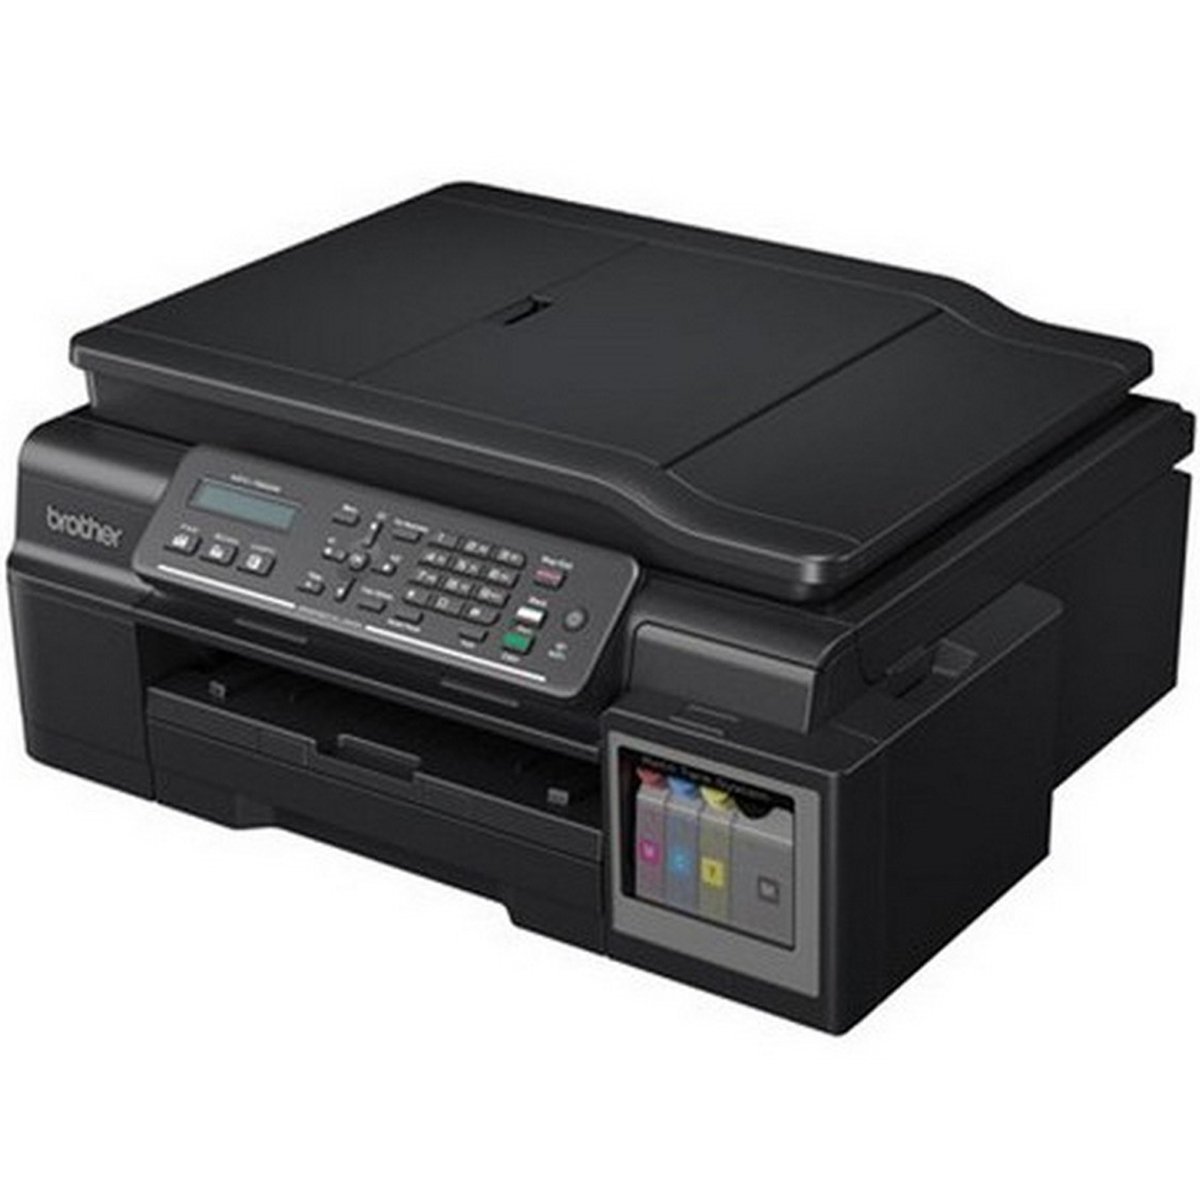 Brother InkJet Wireless Color Printer MFC-T800W